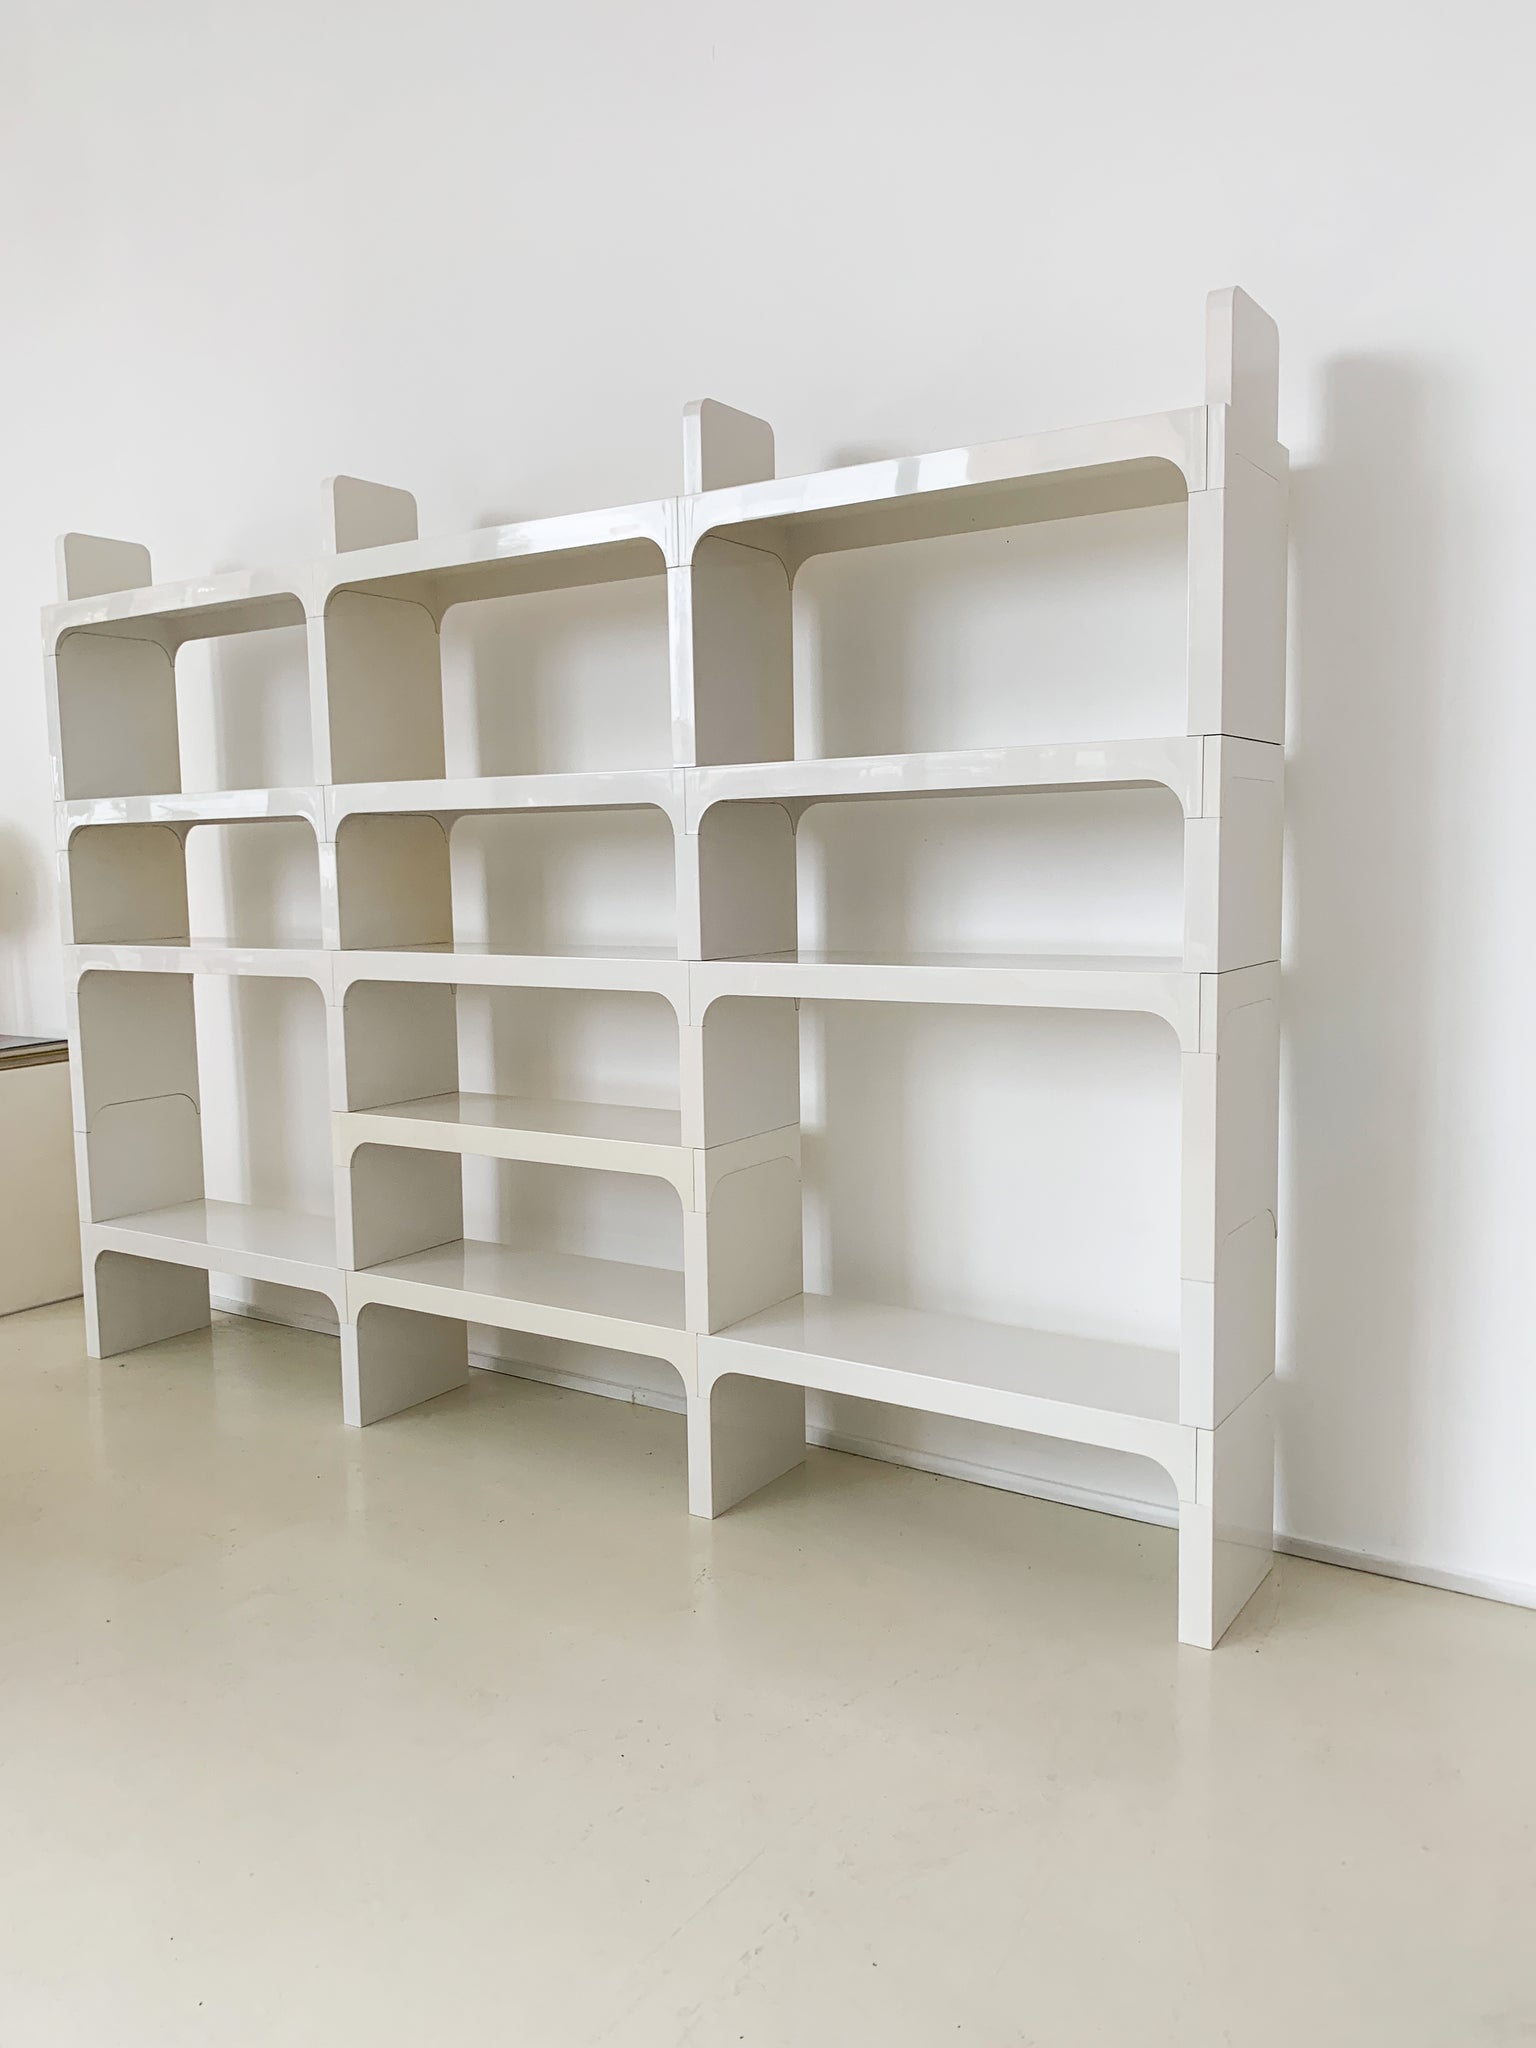 1970s White ABS Plastic Bookcase by Olaf Von Bohr for Kartell- 3 Bays